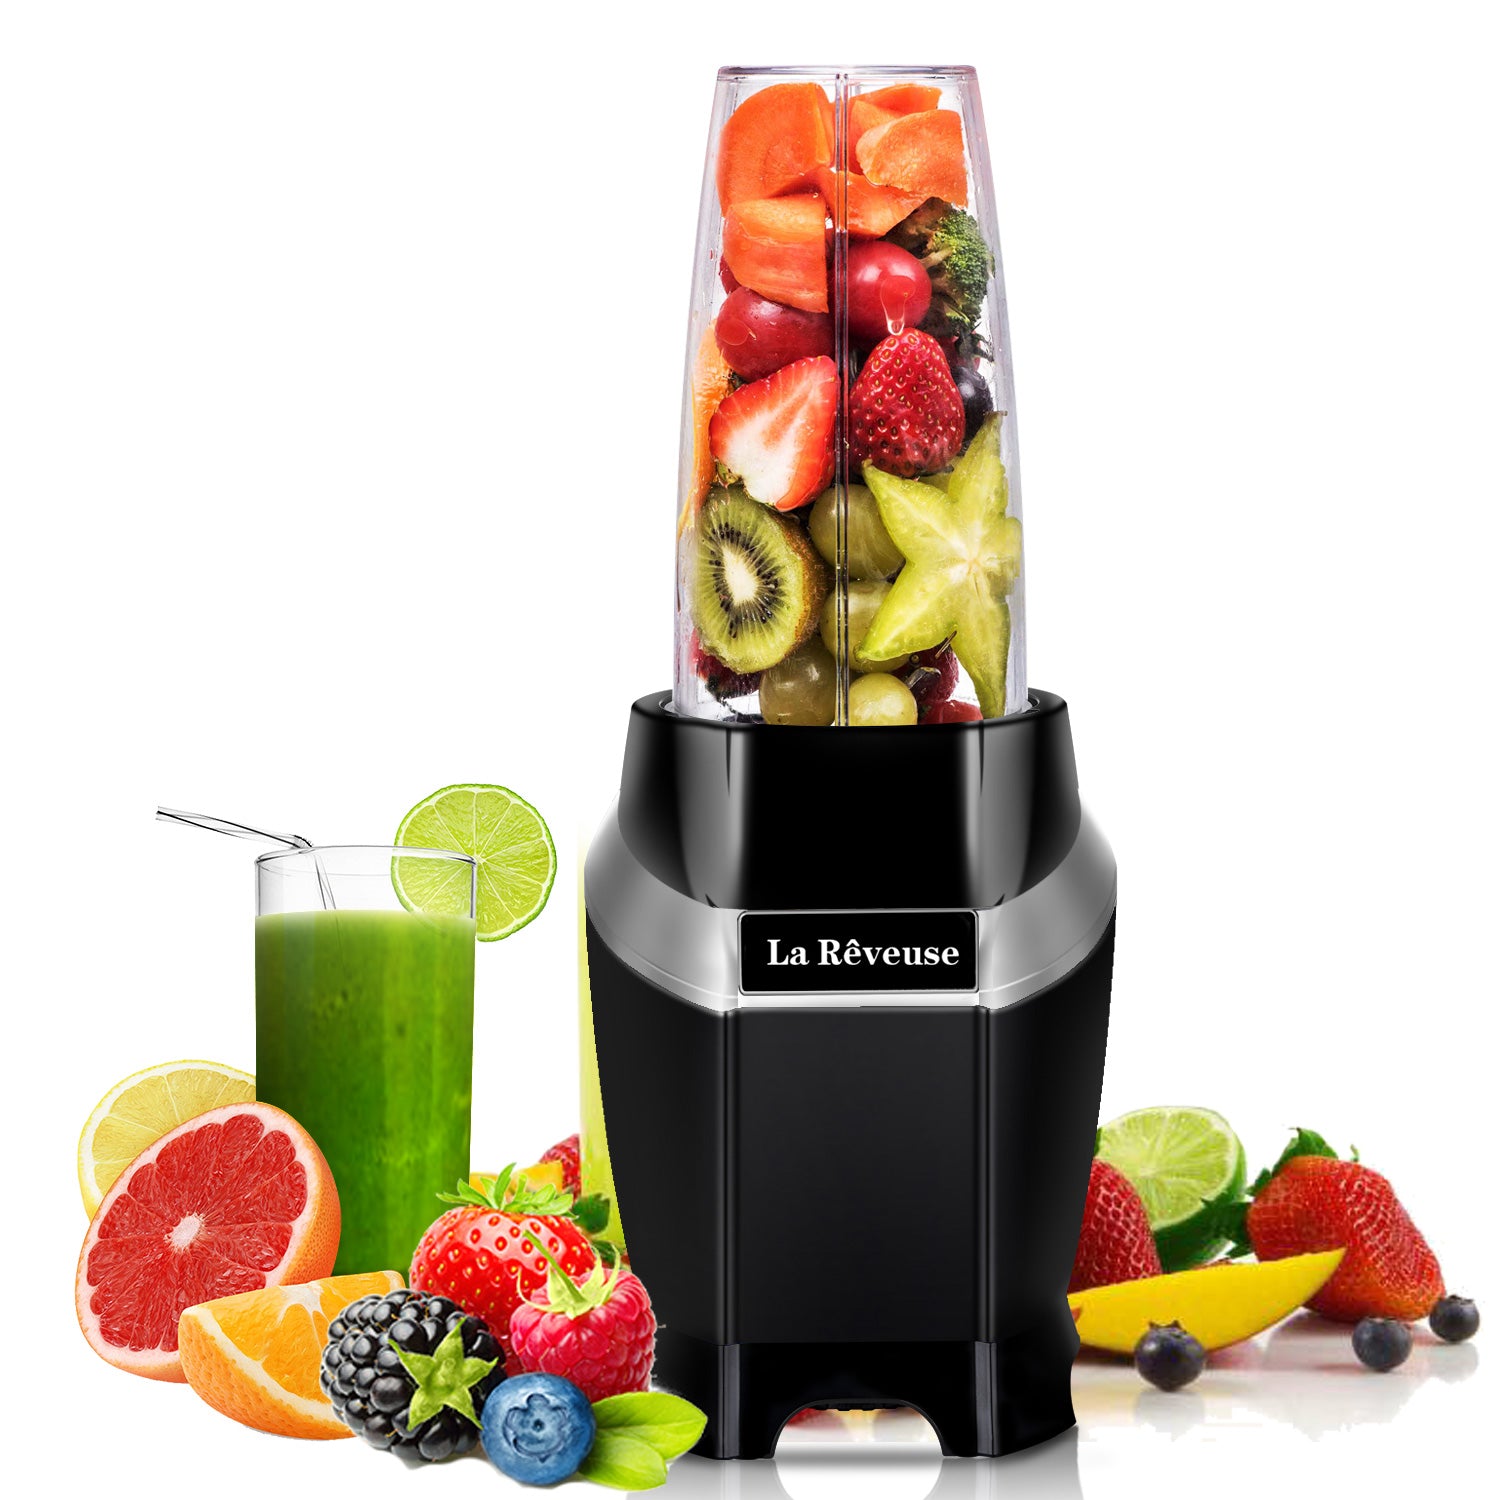 La Reveuse Personal Making Shakes and Smoothies Watt-with – La Reveuse Home